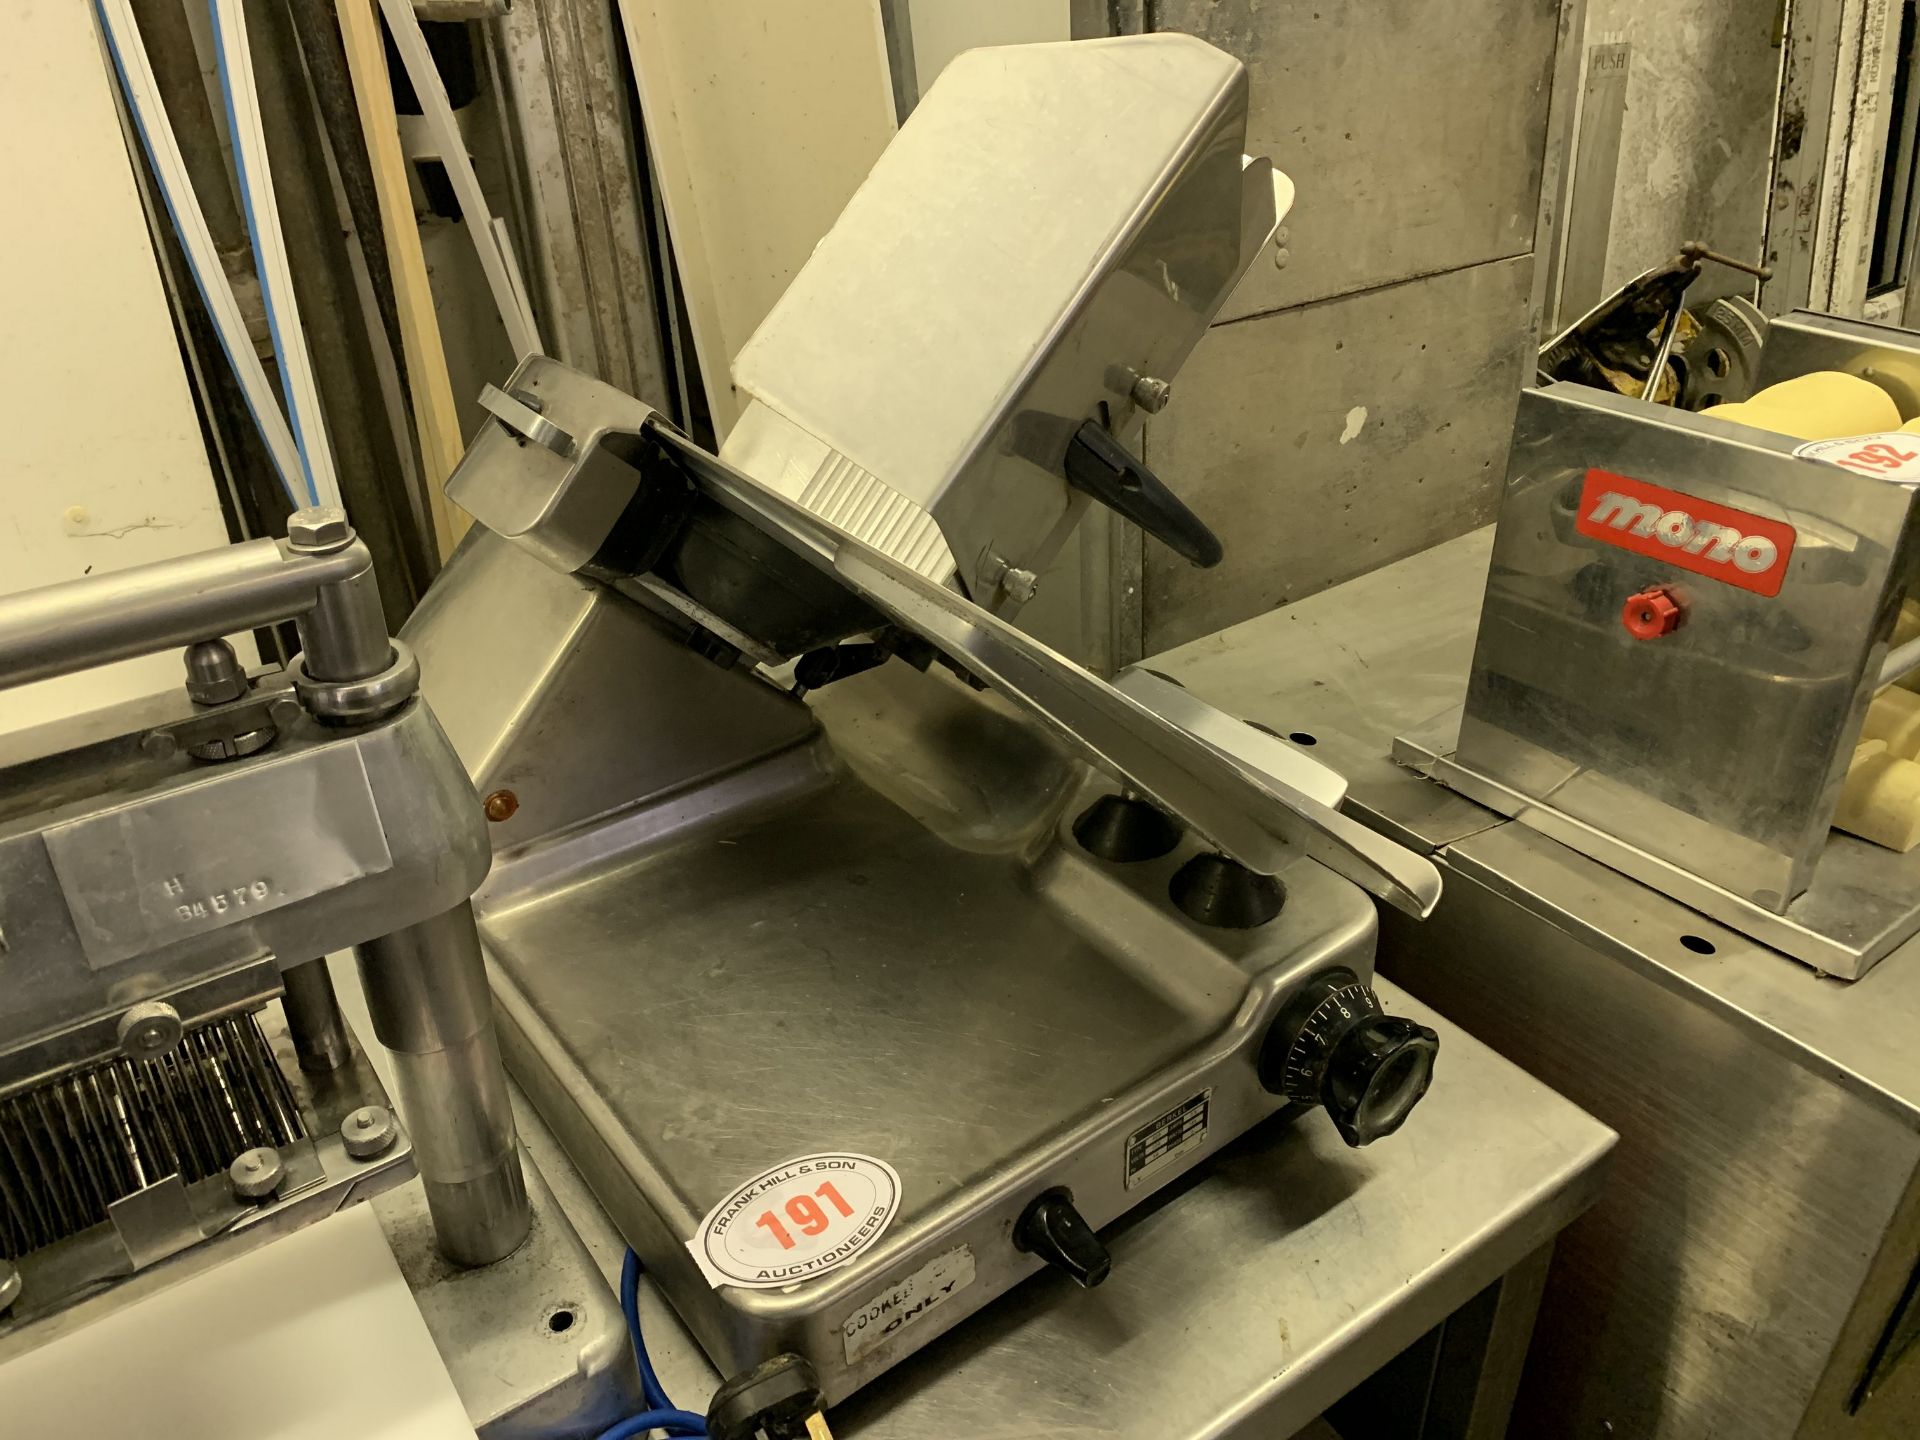 Berkel cooked meat slicer, 12" blade, SITUATED AT ROOS, HU12, VIEWING BY APPOINTMENT ONLY